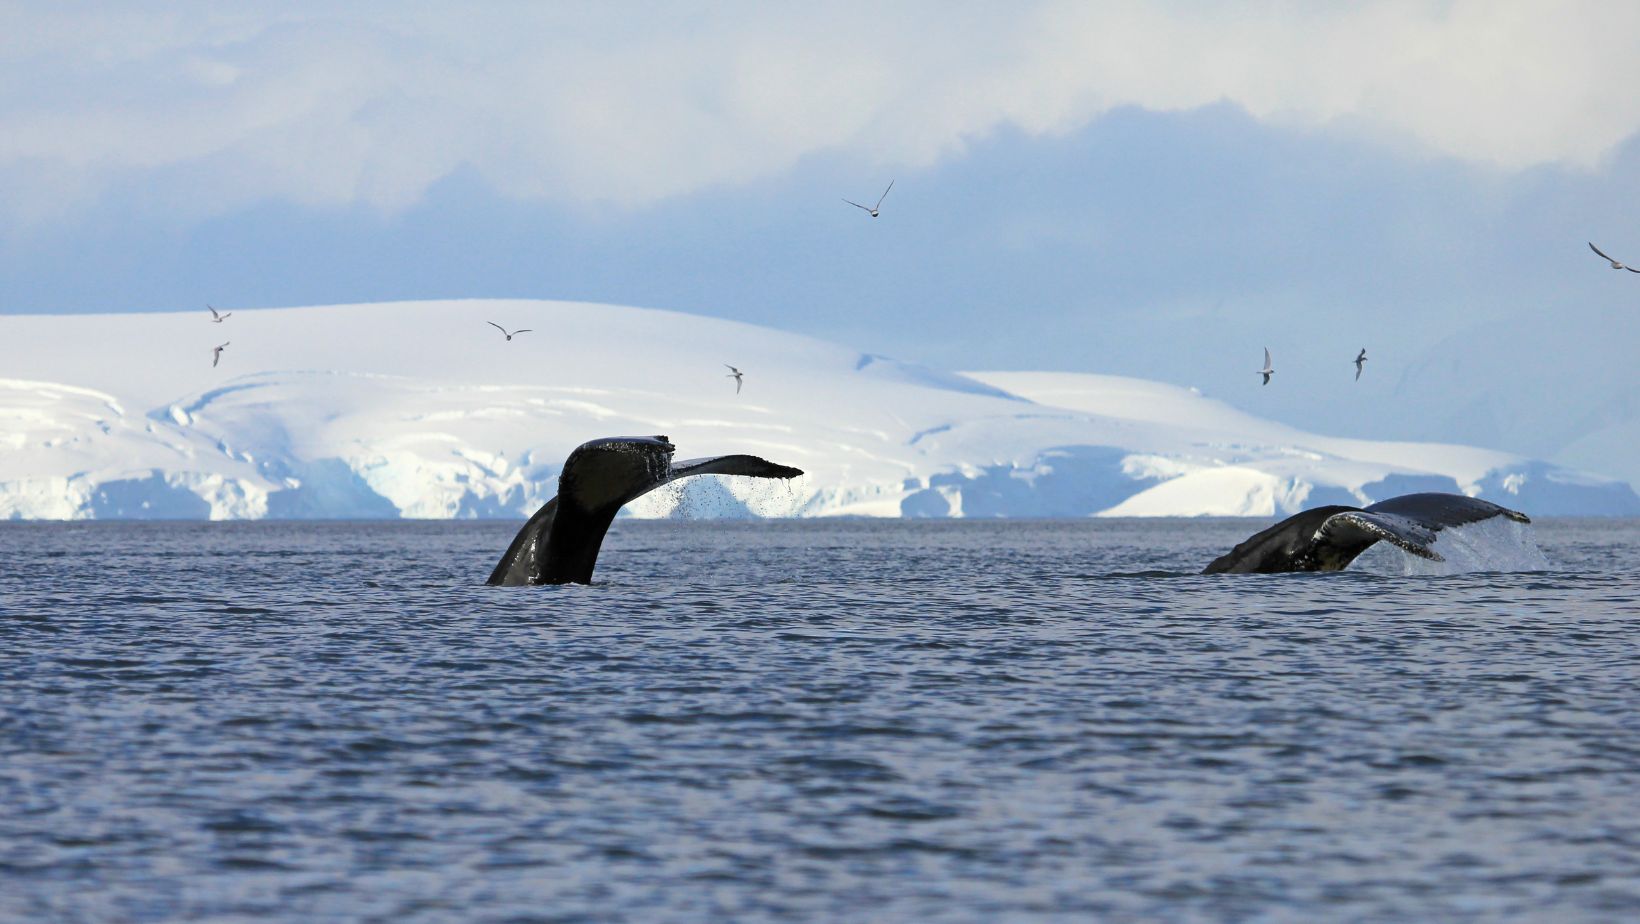 Whales diving below the surface with their flukes above the water and ice caps in the distance.